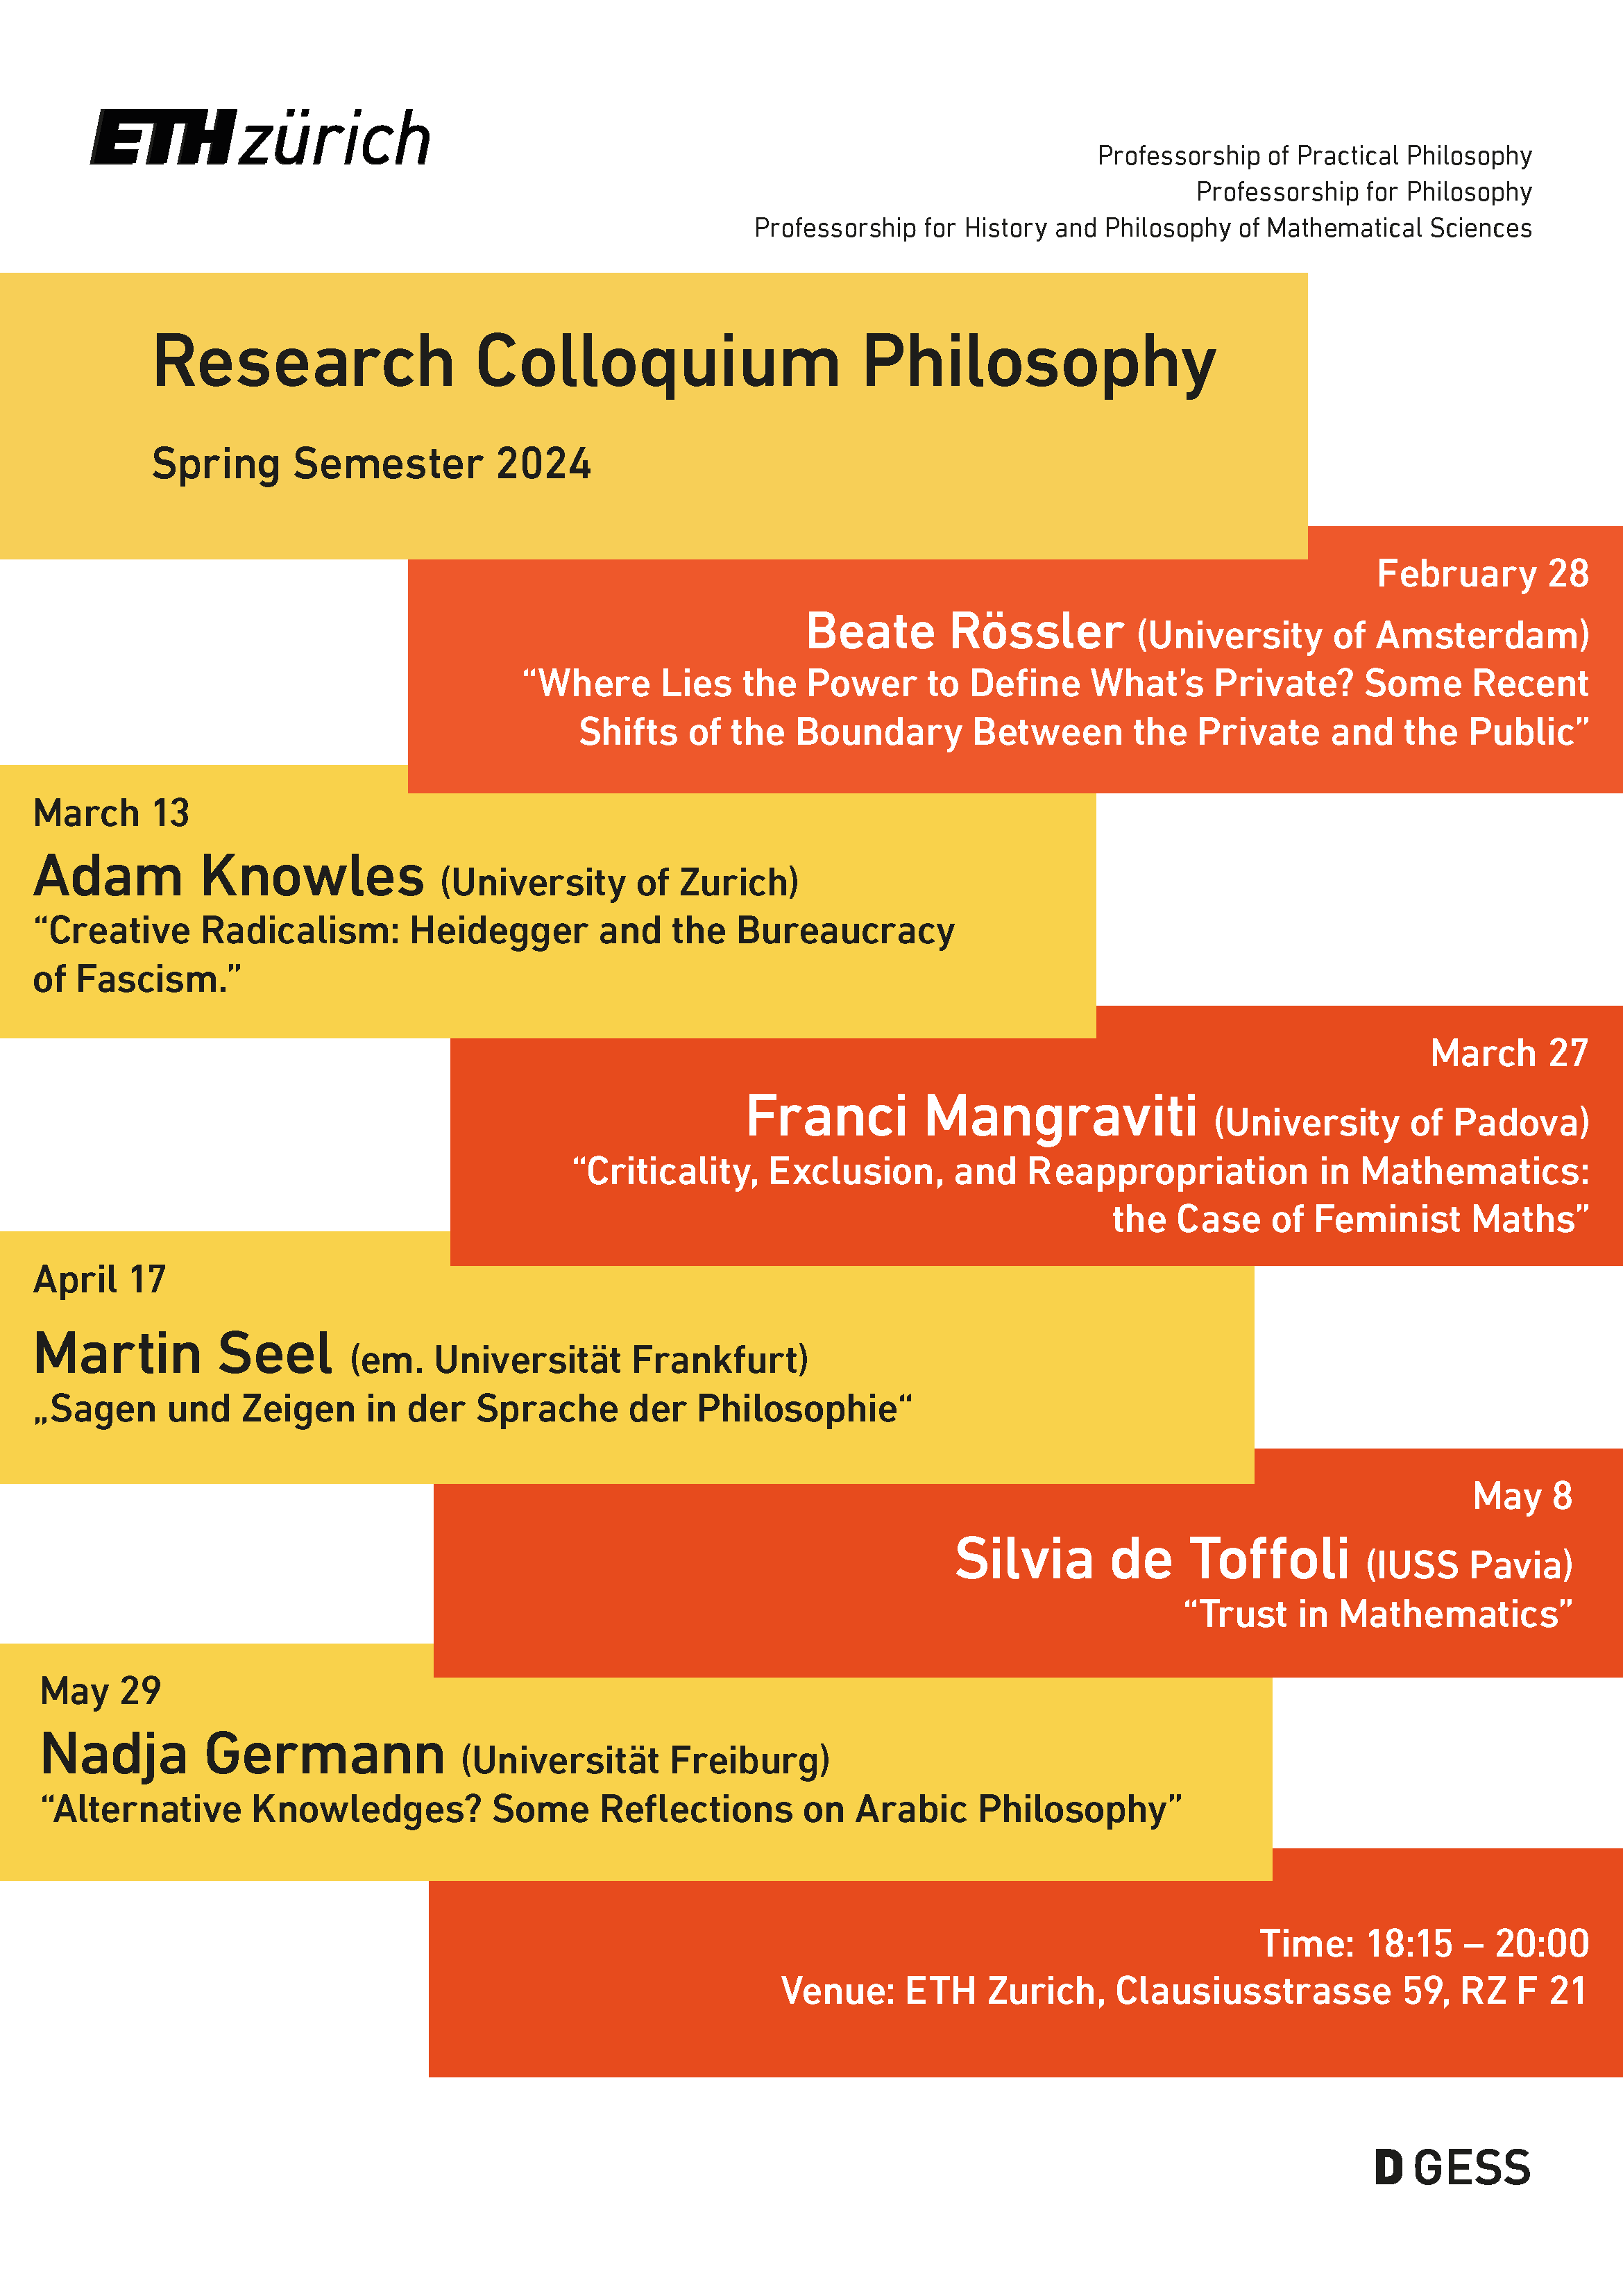 Programme of the Research Colloquium Philosophy Spring Semester 2024